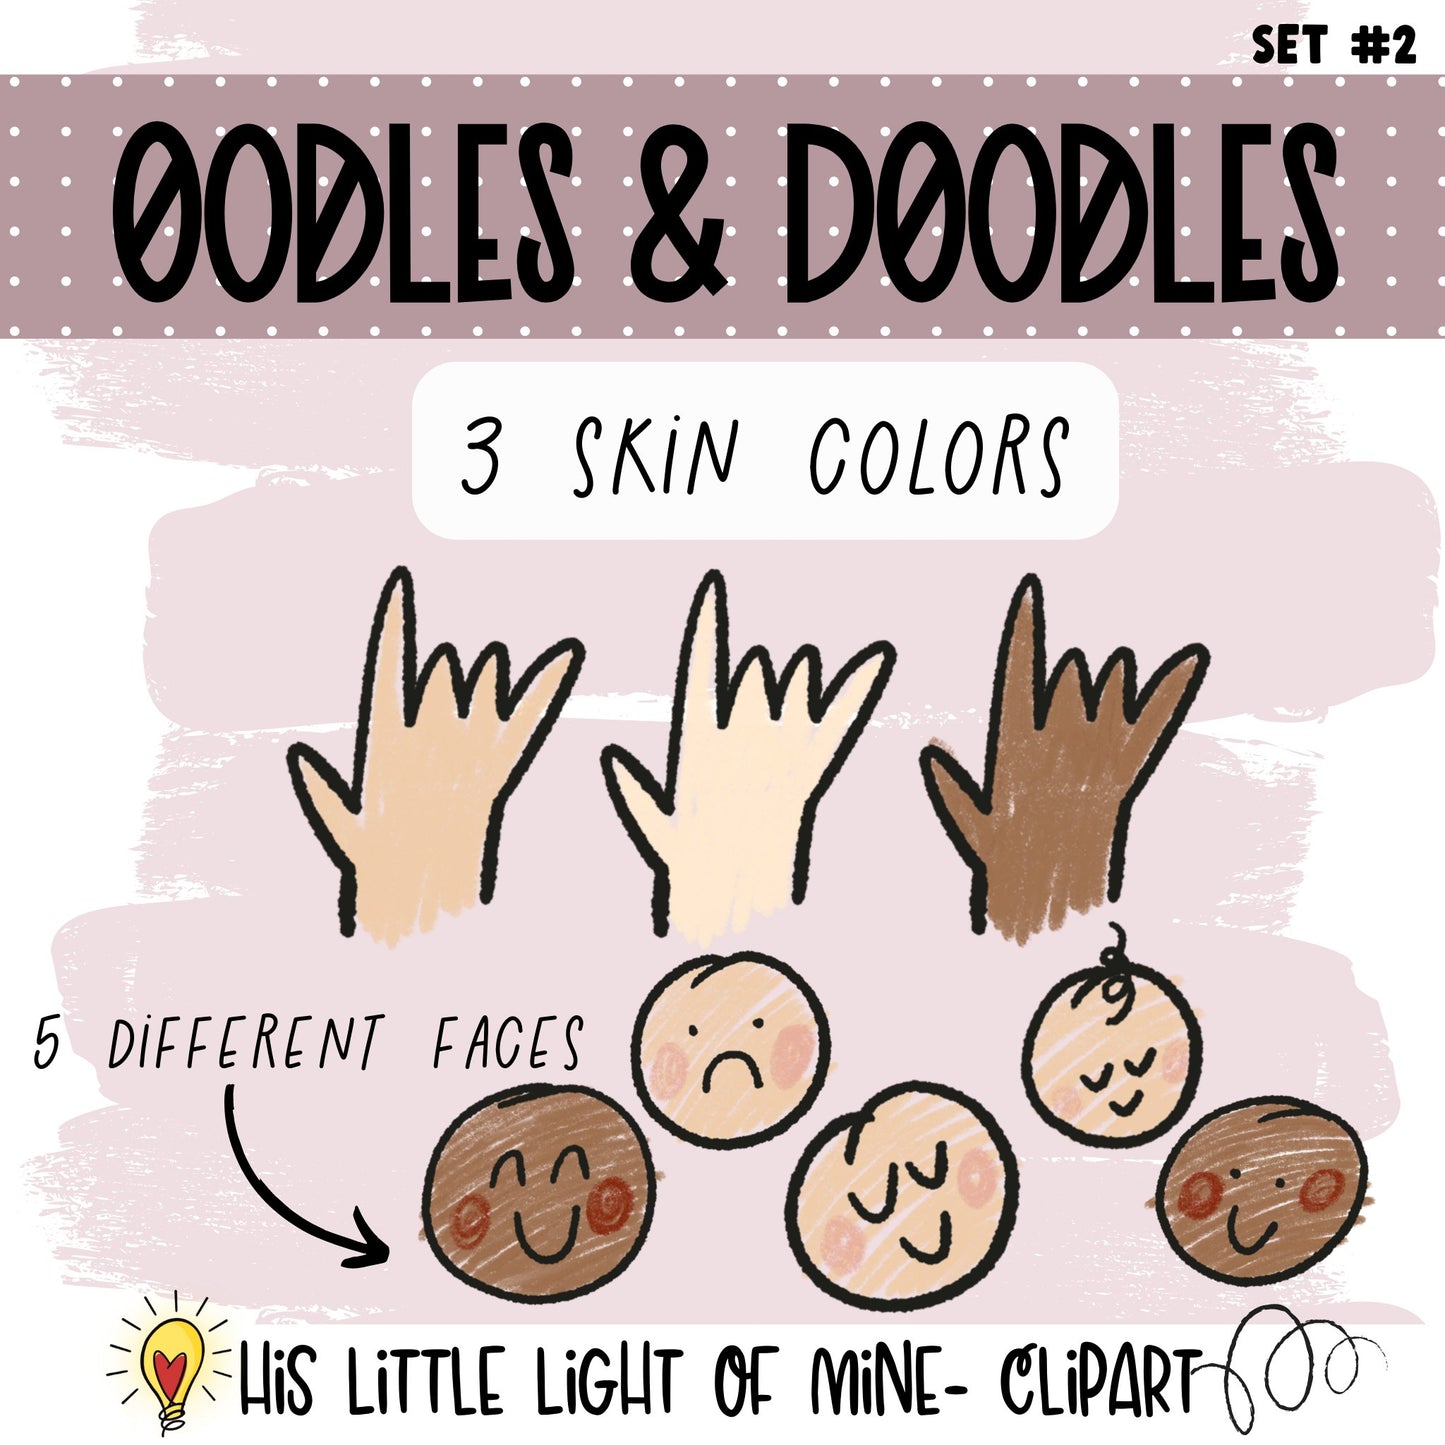 Oodles & Doodles Clip Art Set #2 clip art pack showing 3 diverse skin colors of the ASL handshape of “I love you,” and 5 different frowning and smiling faces